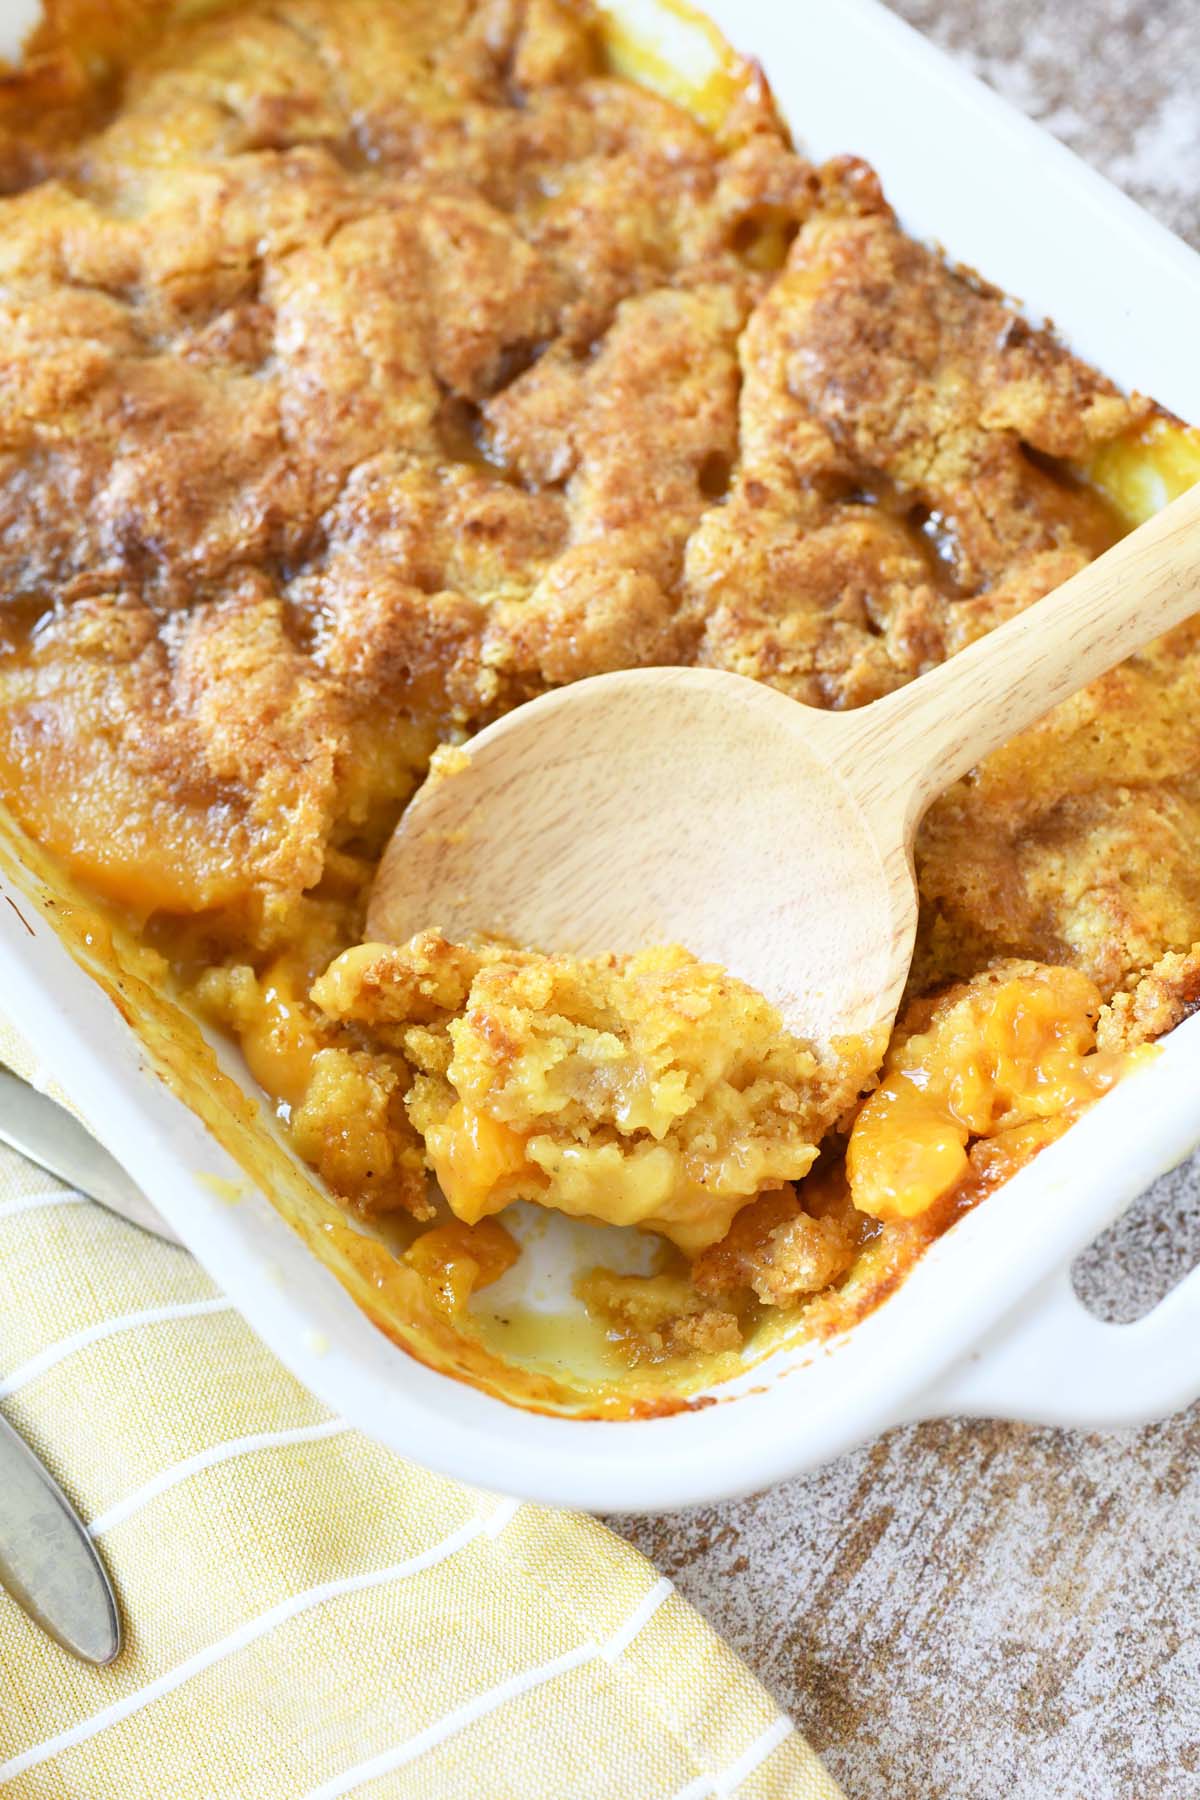 Canned peaches dump cake in a white pan with a wooden spoon.